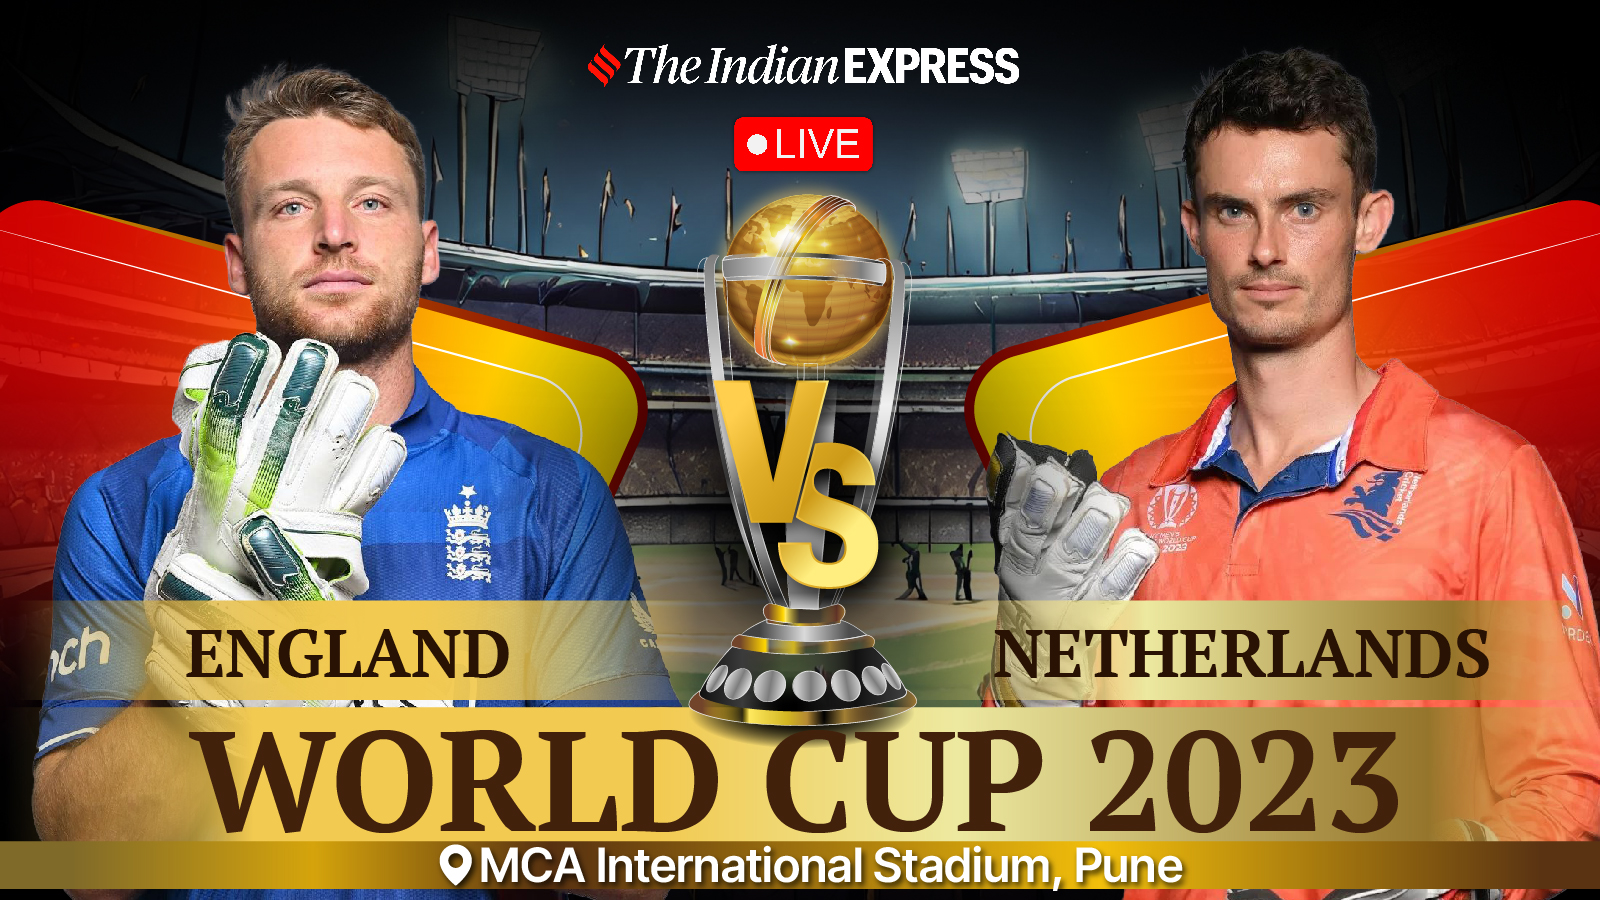 England vs Netherlands Live Score, World Cup 2023: Willey snaps up Ackermann, NED 2 down in a flash | Cricket News